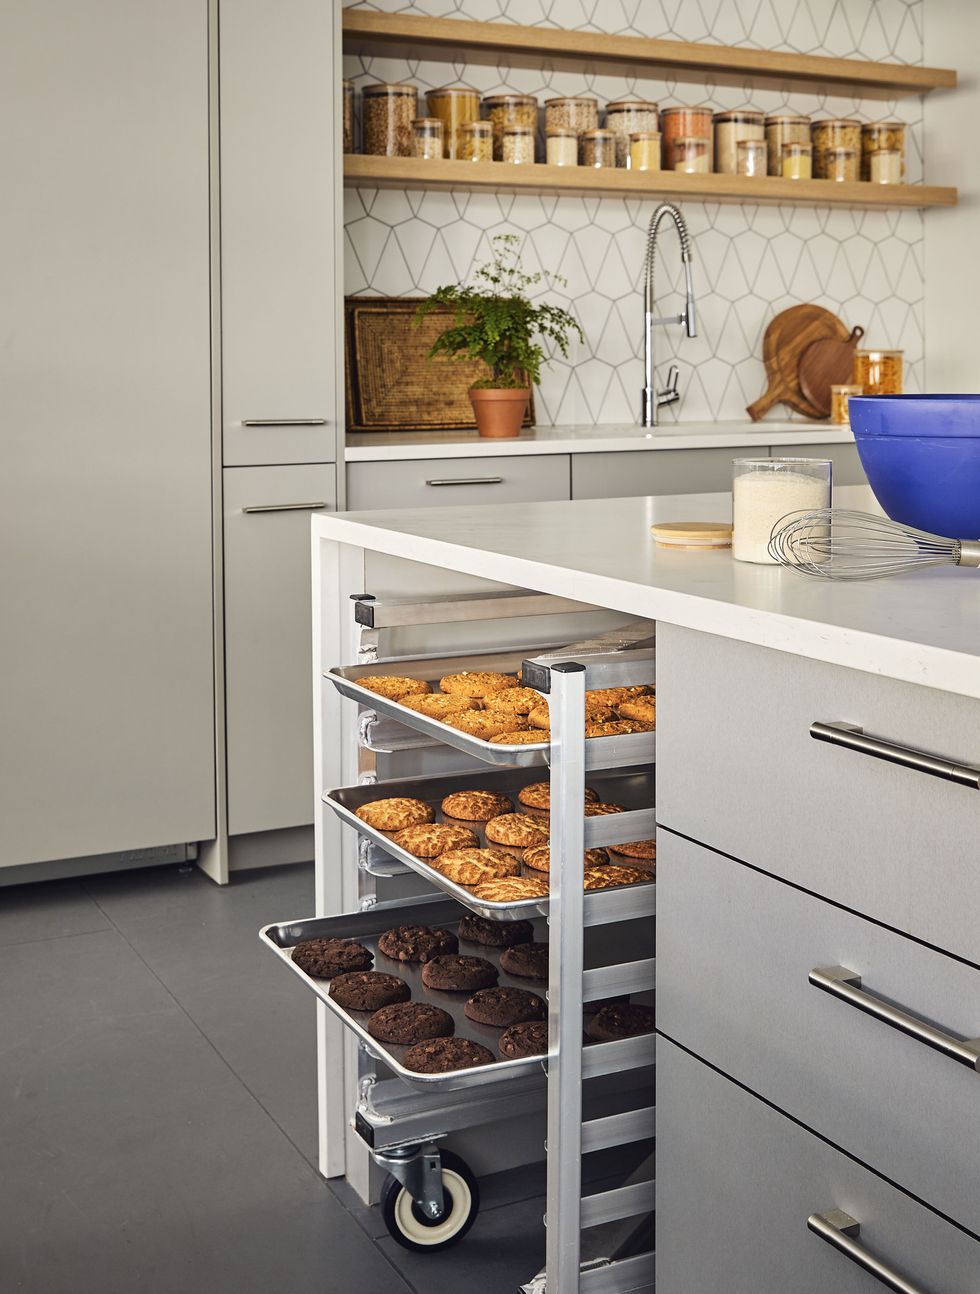 cooling rack with baking sheets full of cookies, tucked away in a kitchen island